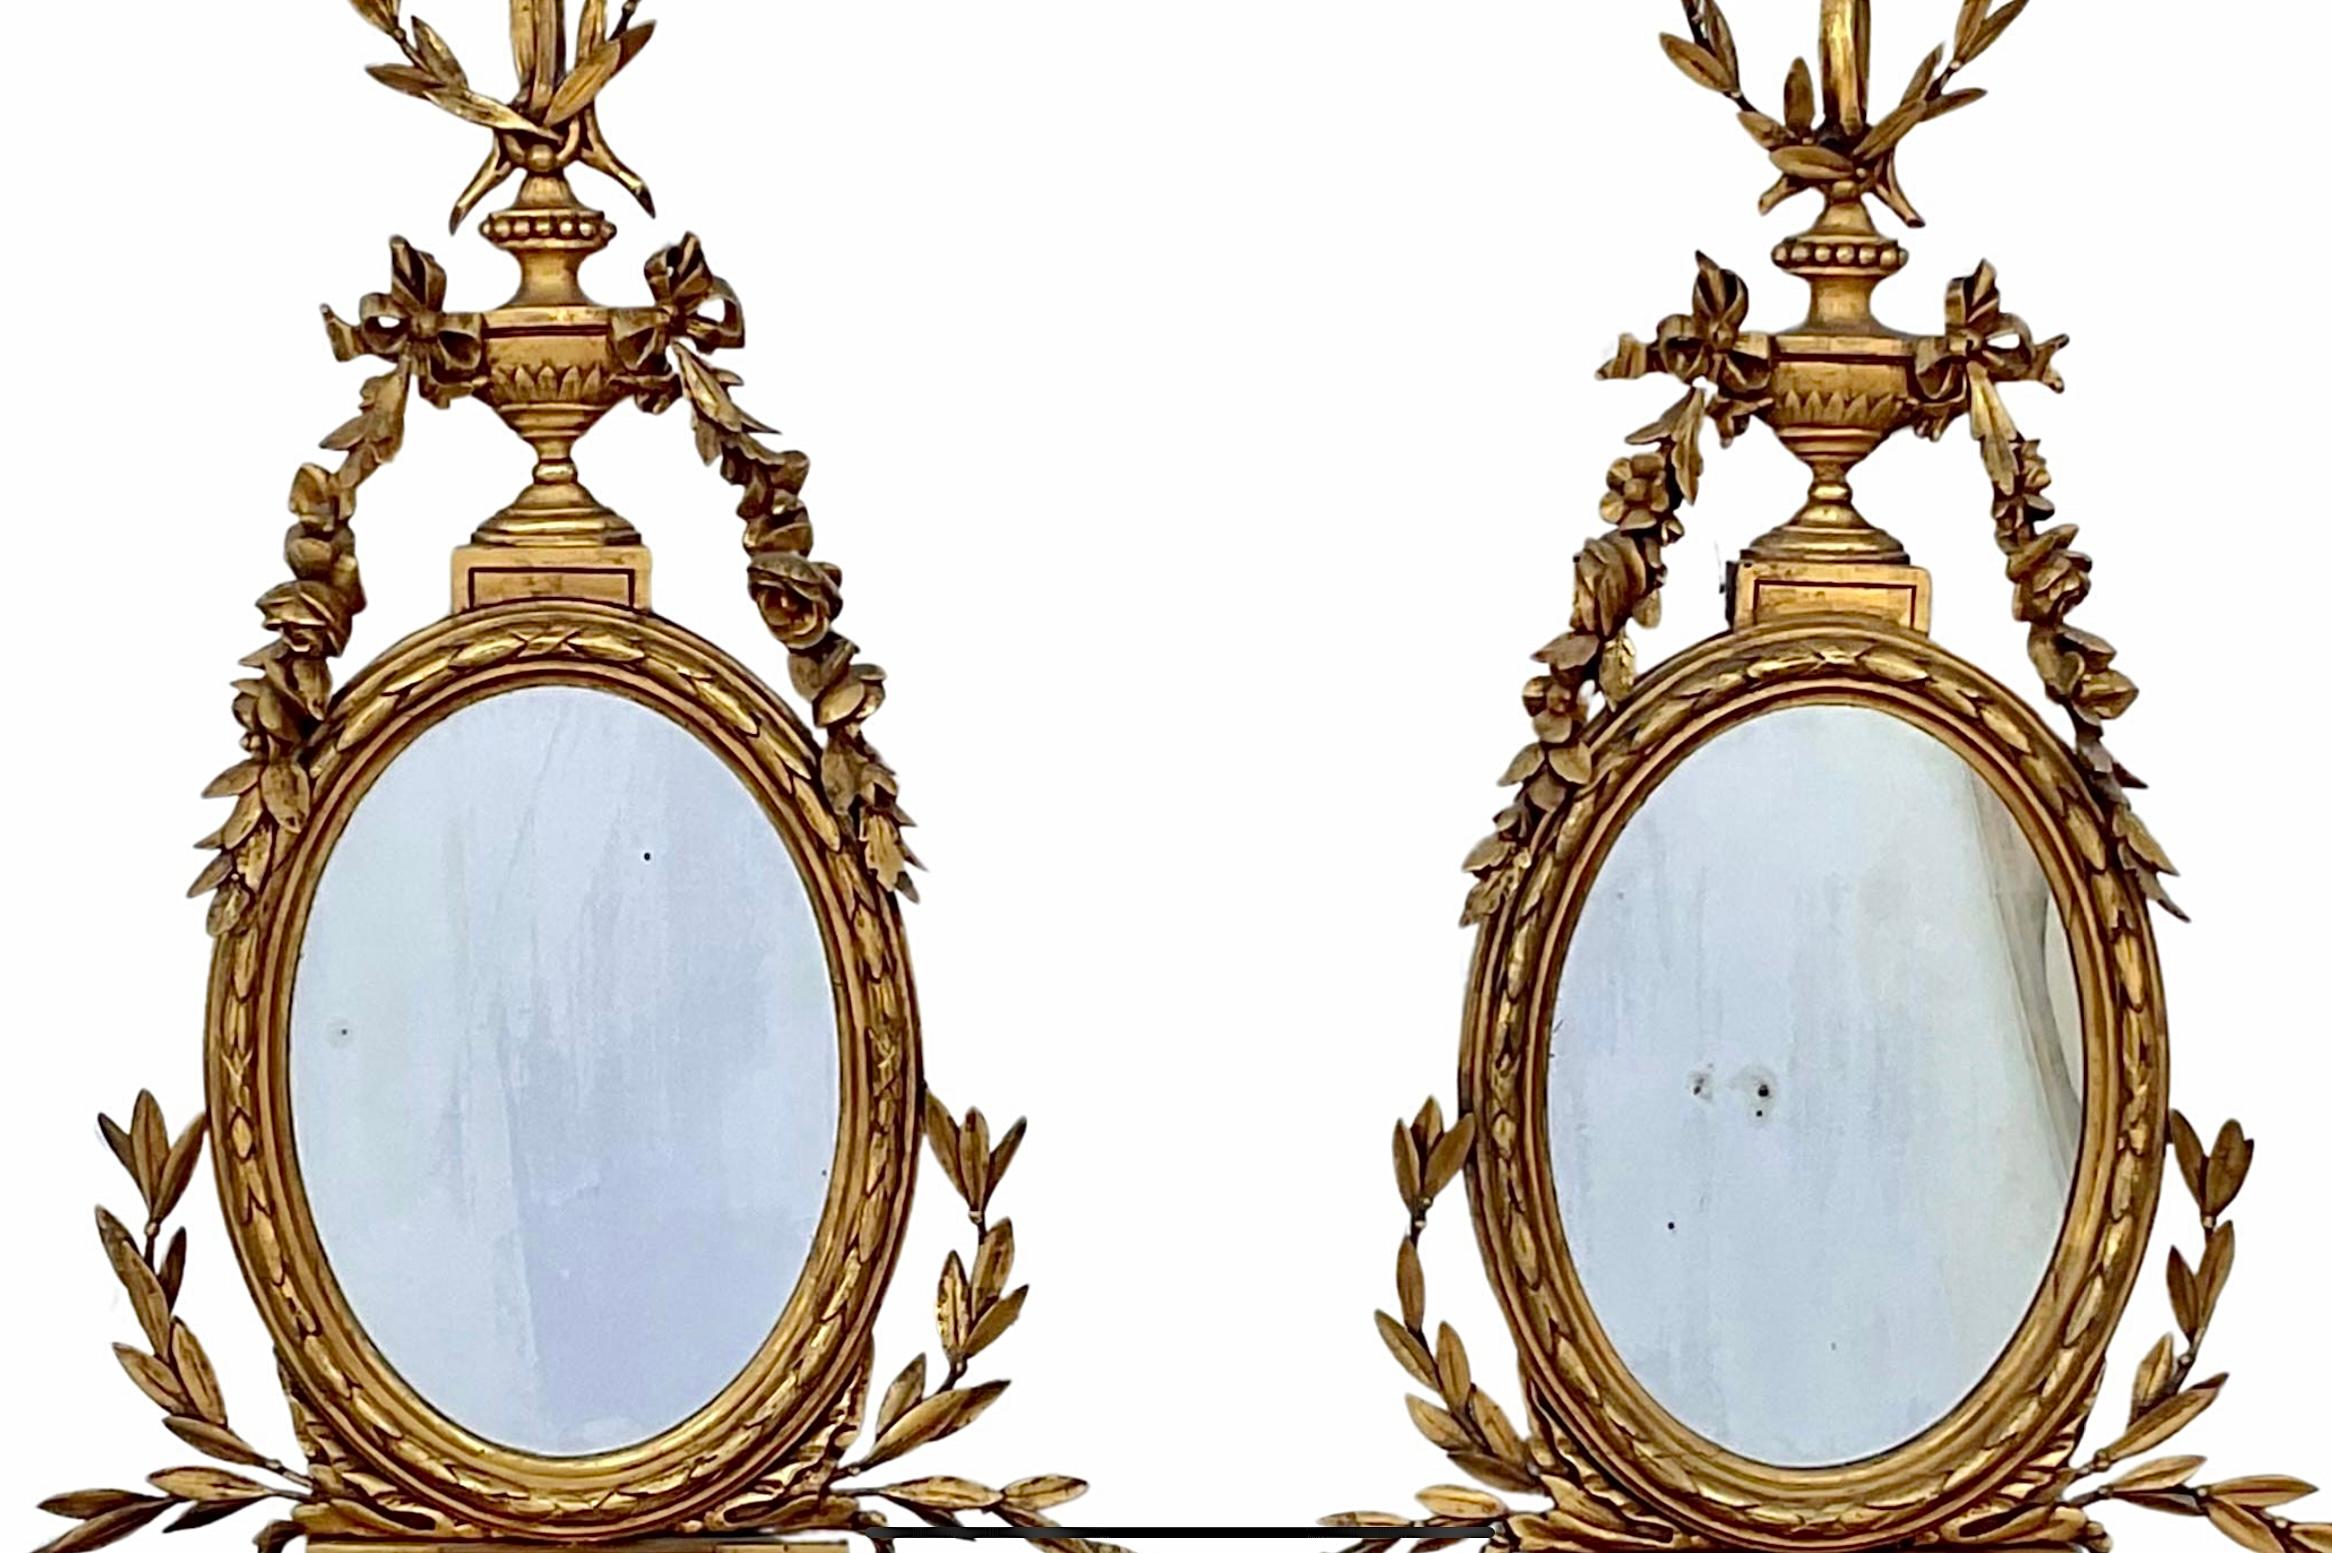 Pair of 19th century George III Style Giltwood and composition Girandole Wall Brackets. A ribbon and bow of gold above a carved urn with gold foilate sweeping down to oval mirror above an urn shaped wall shelf for display. These girandoles wall